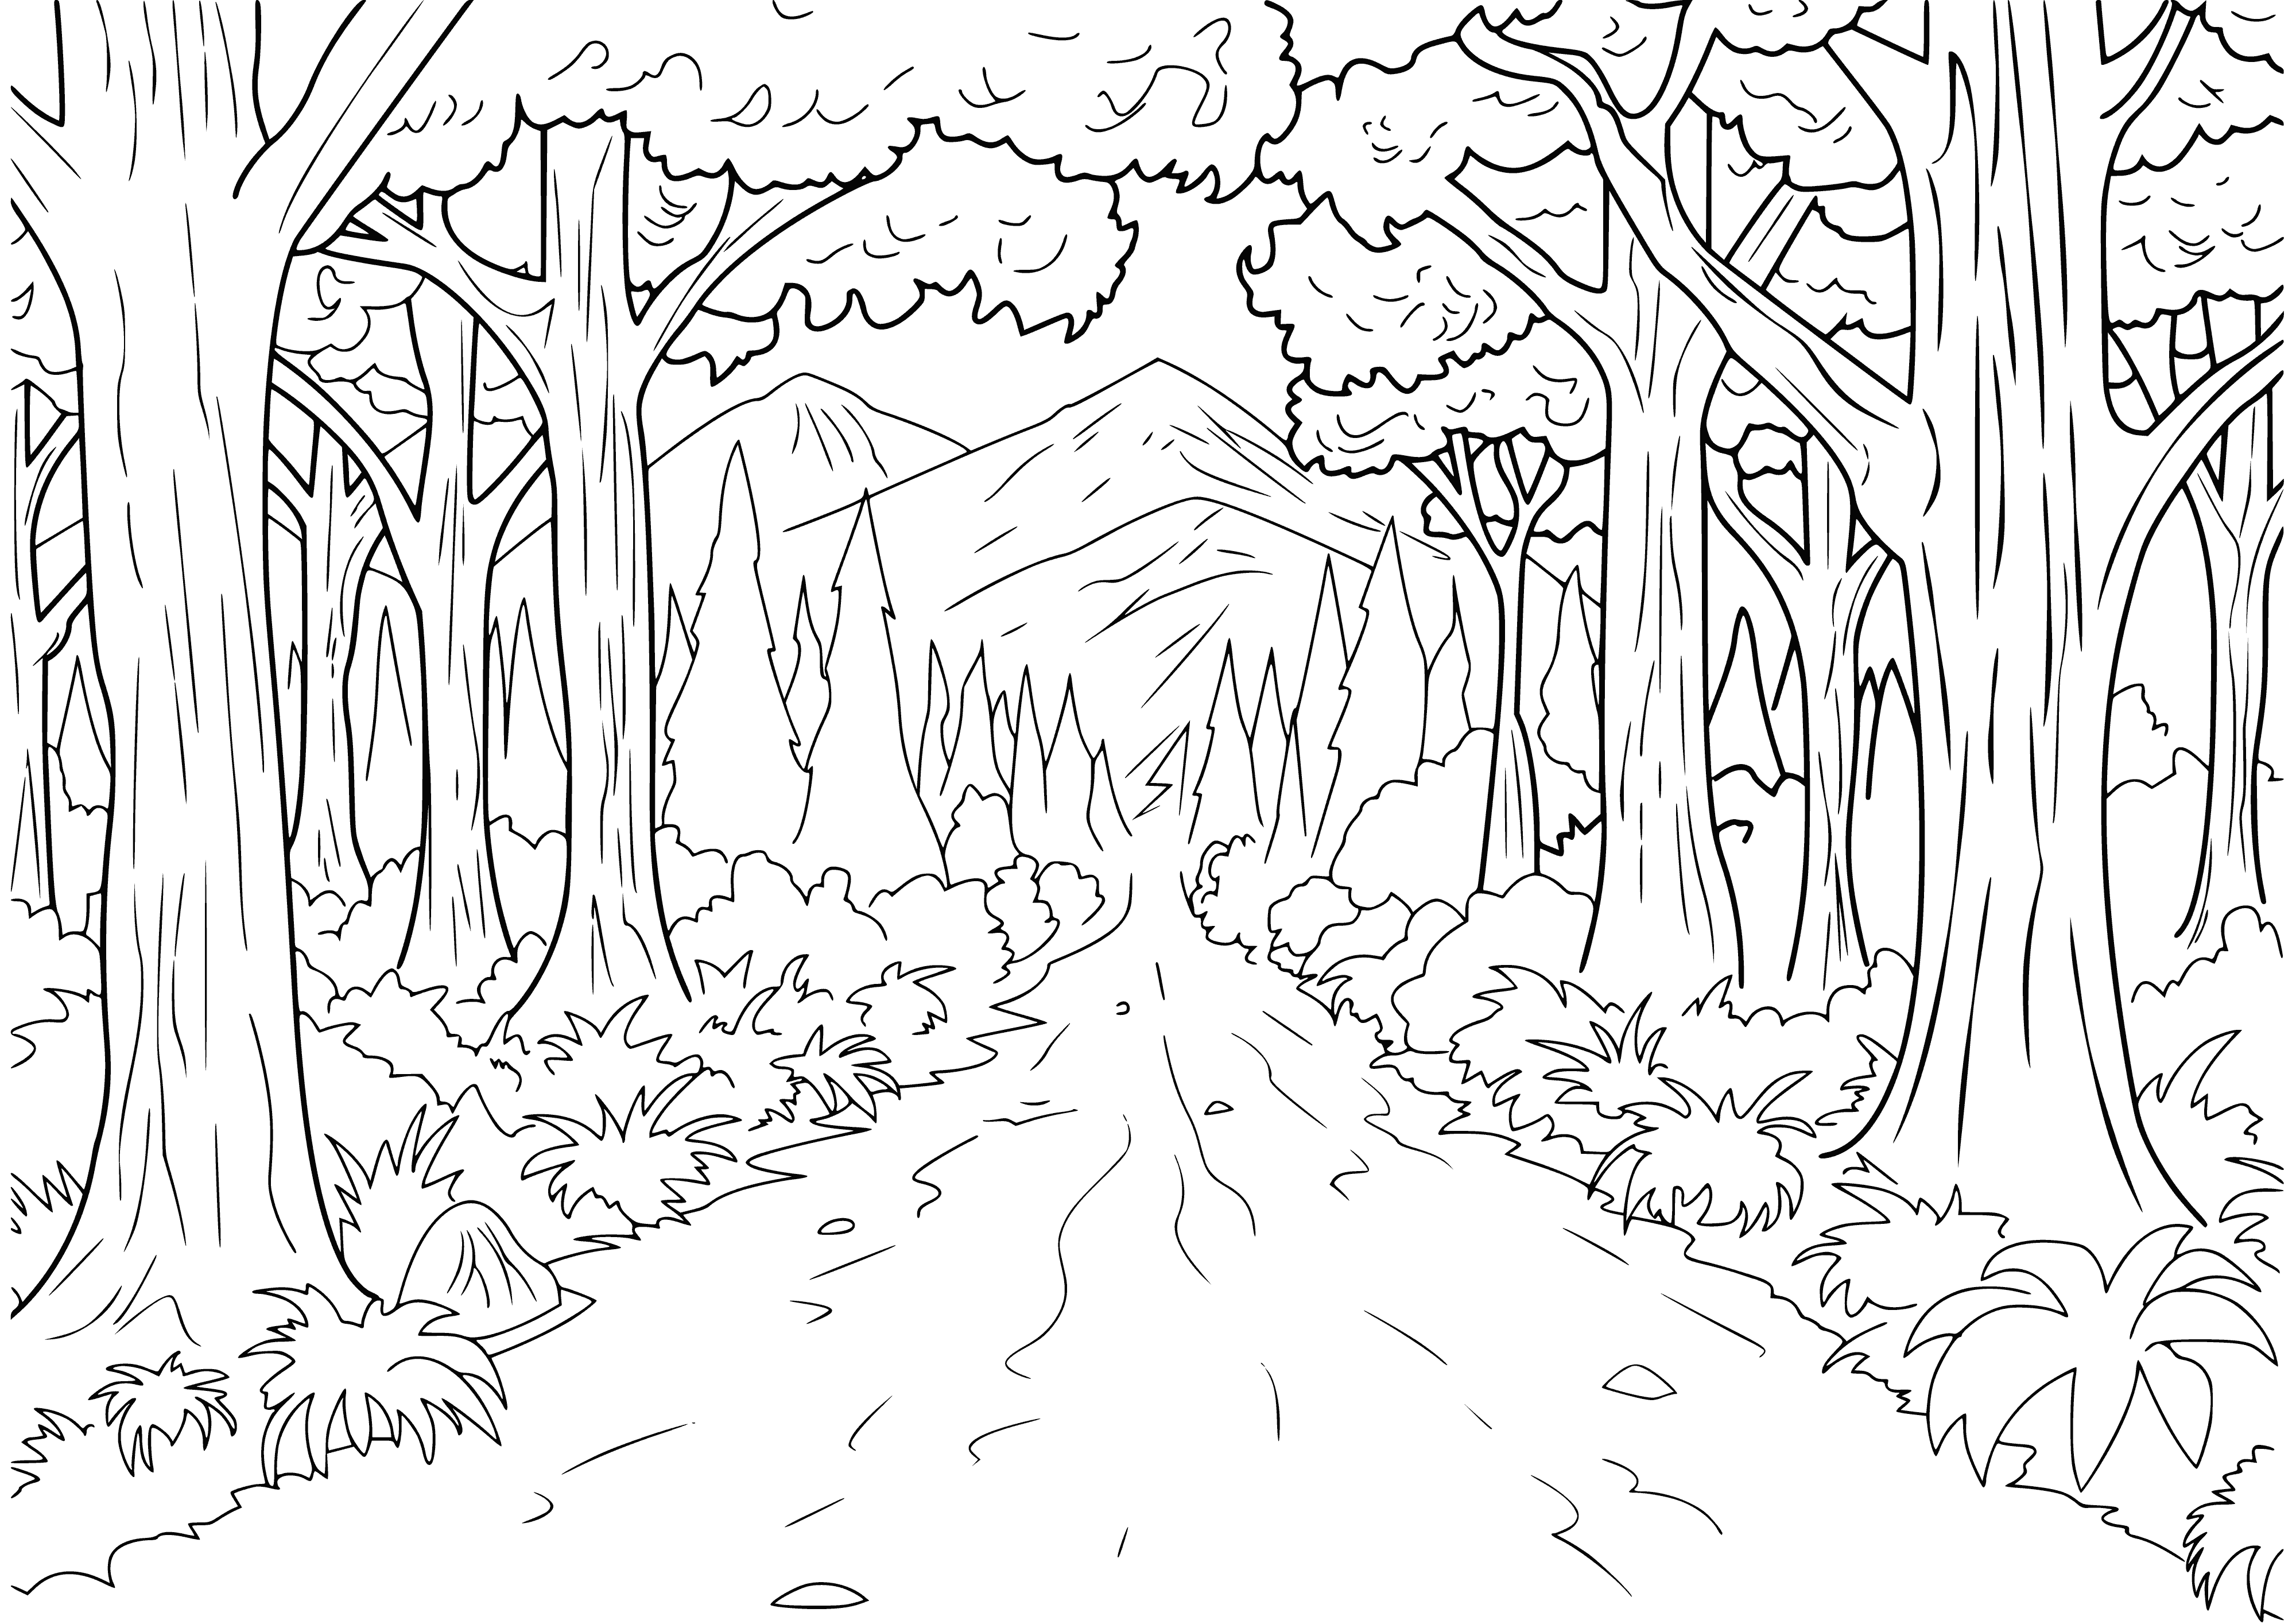 coloring page: Coloring page shows a dirt road lined with green trees and brown/yellow leaves; blue sky with white clouds.